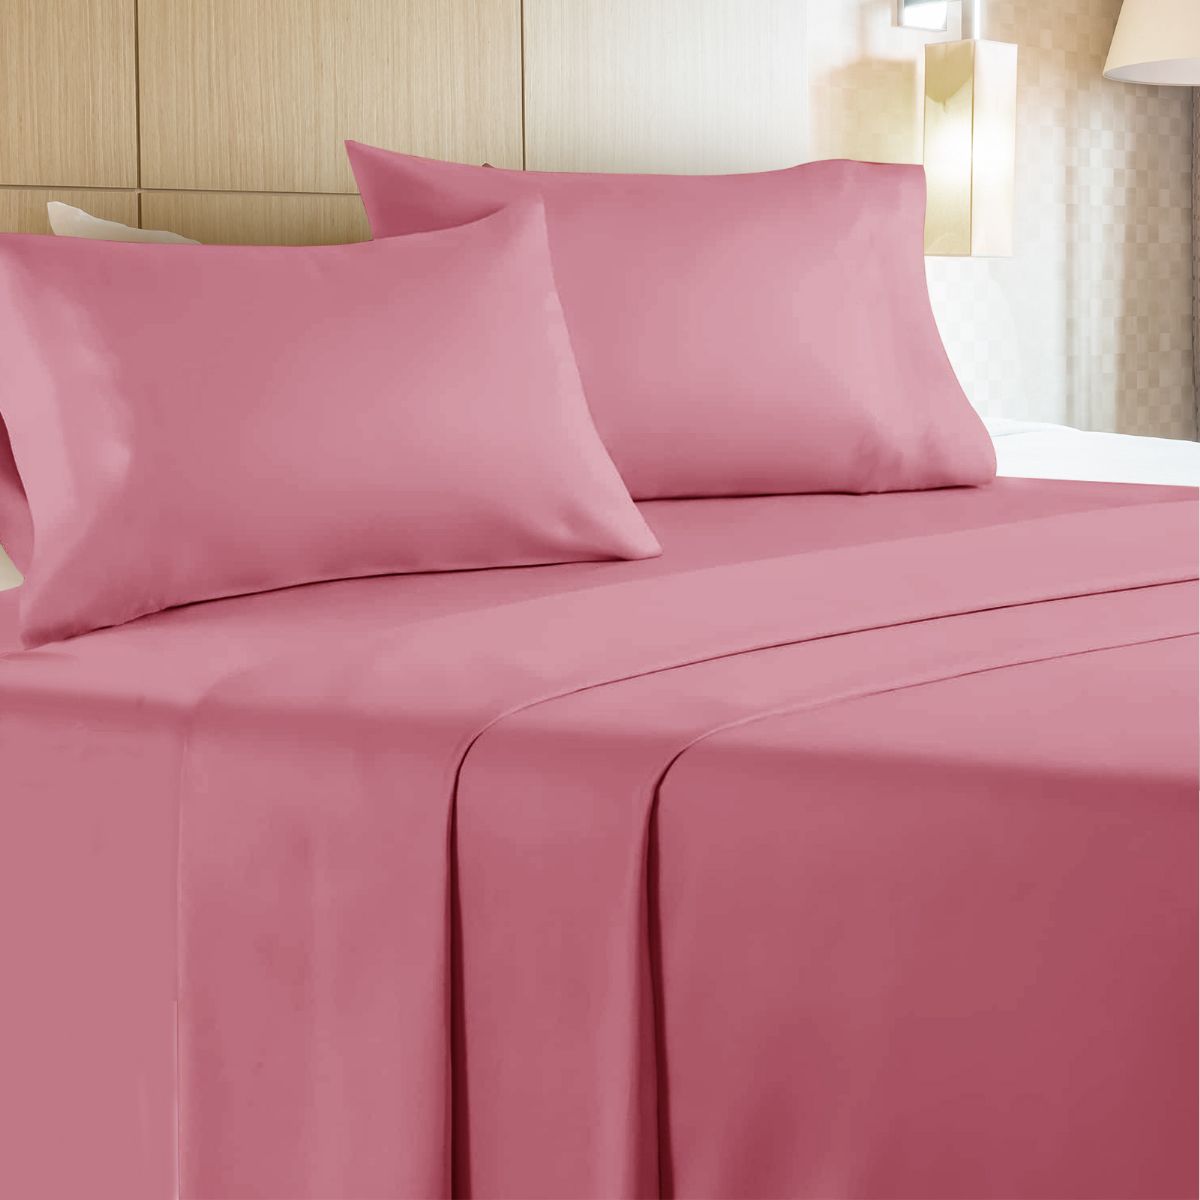 6 Sets 4 Piece Microfiber Bed Sheet Set Queen Size In Maroon - Bed Sheet Sets